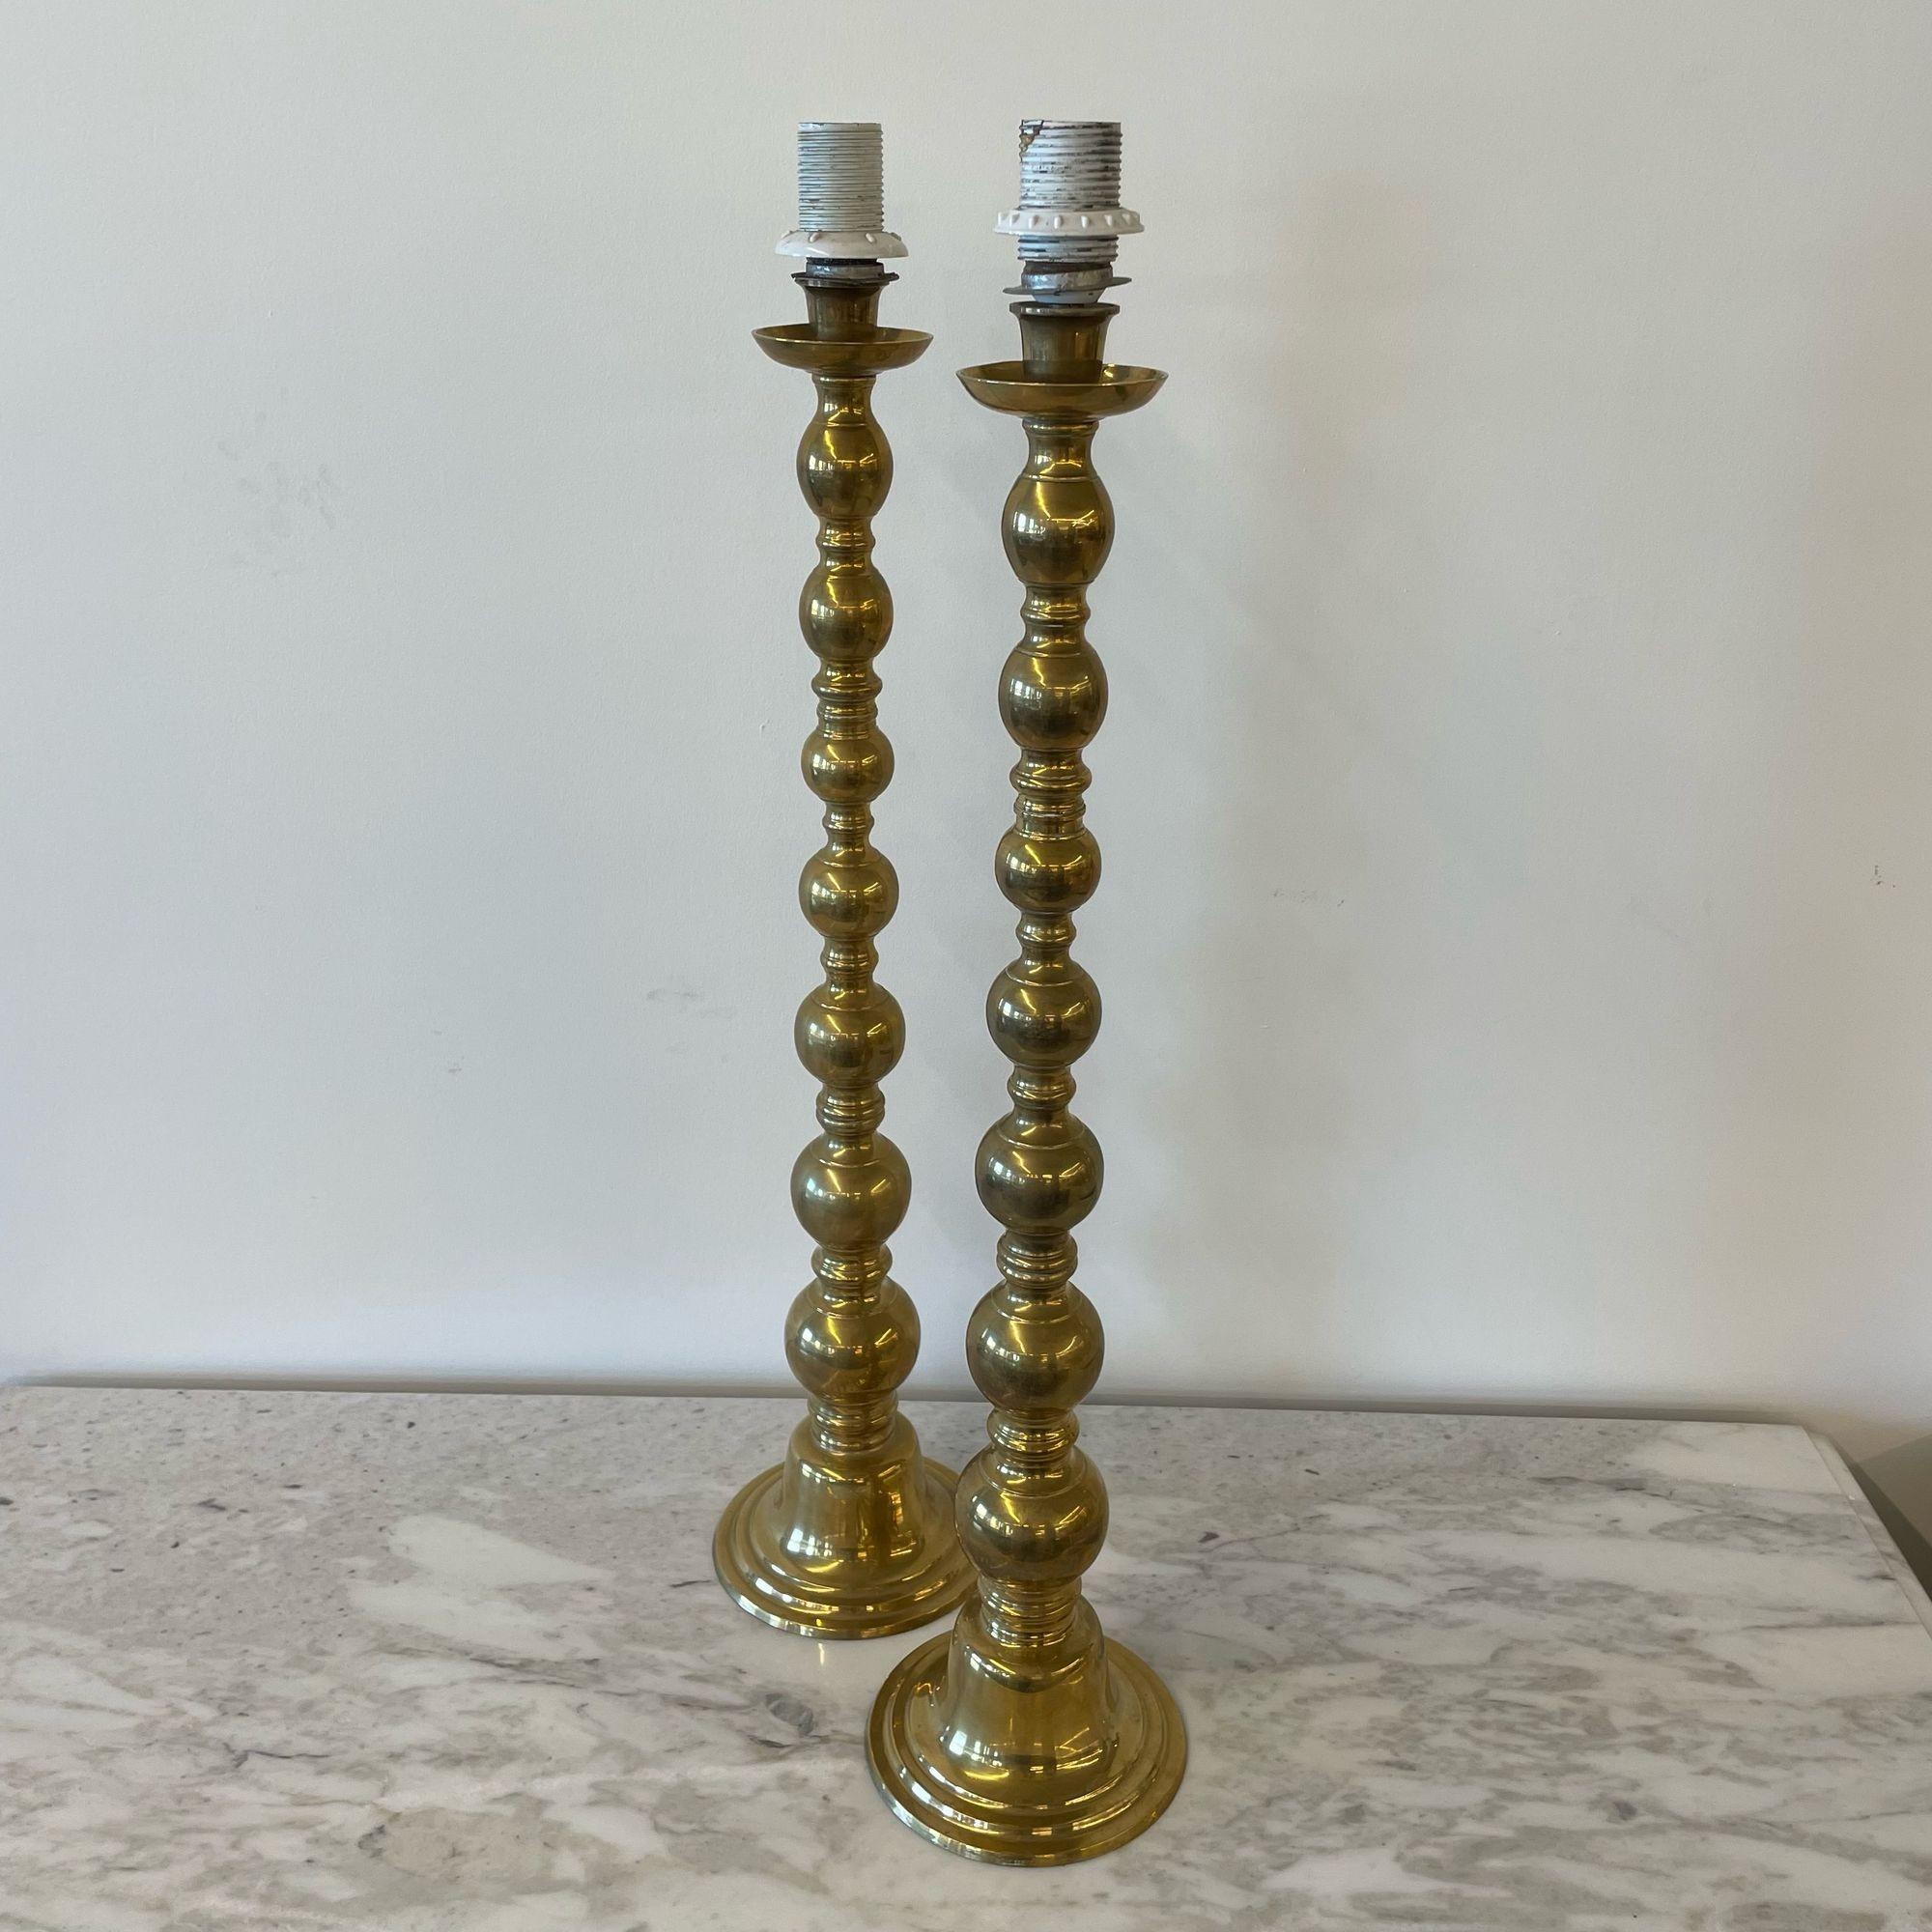 Pair of Hollywood Regency Solid Brass Drum Shape Table Lamps, Neoclassical Style In Good Condition For Sale In Stamford, CT